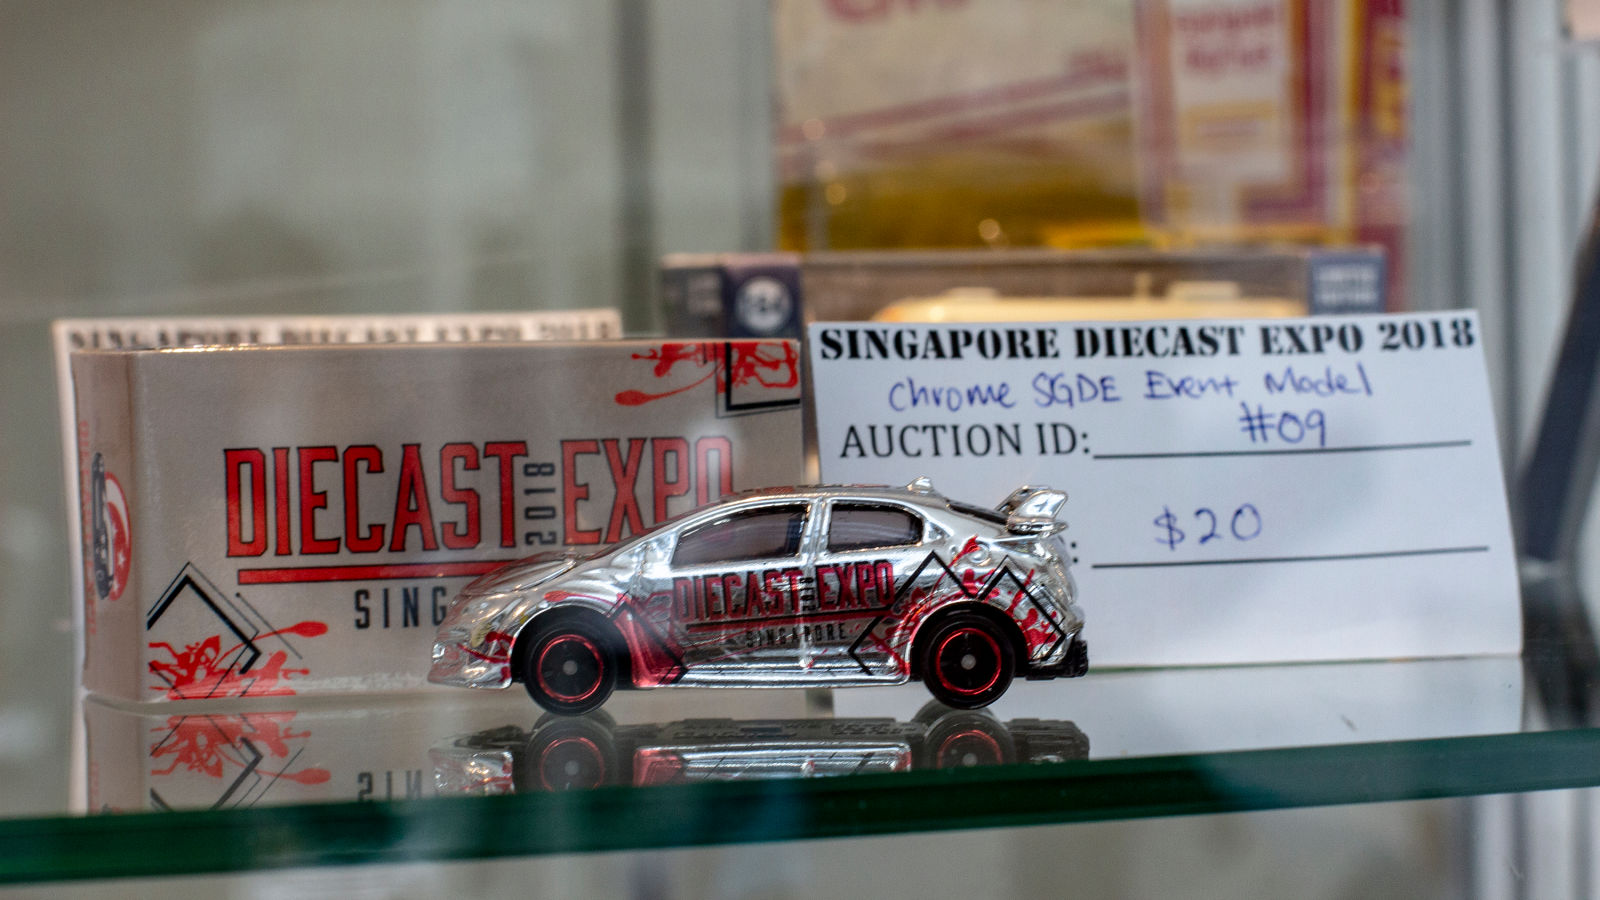 Illustration for article titled Singapore Diecast Expo: The Very First